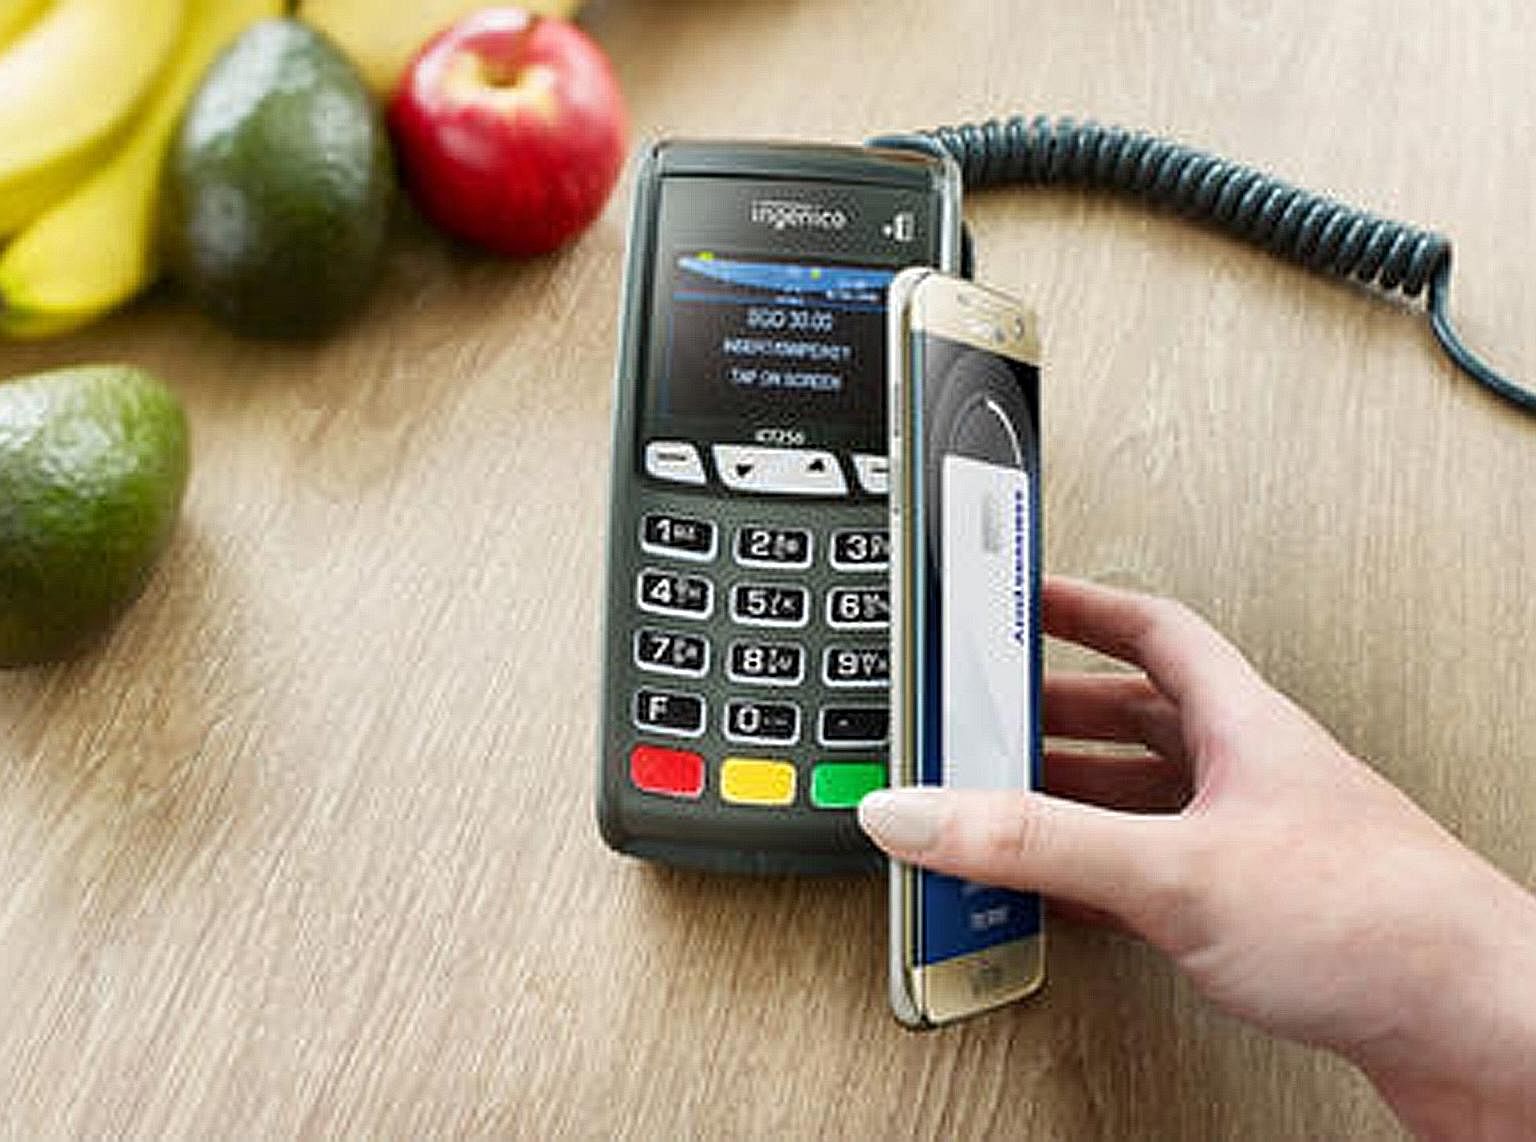 Samsung Pay was launched here on Thursday.